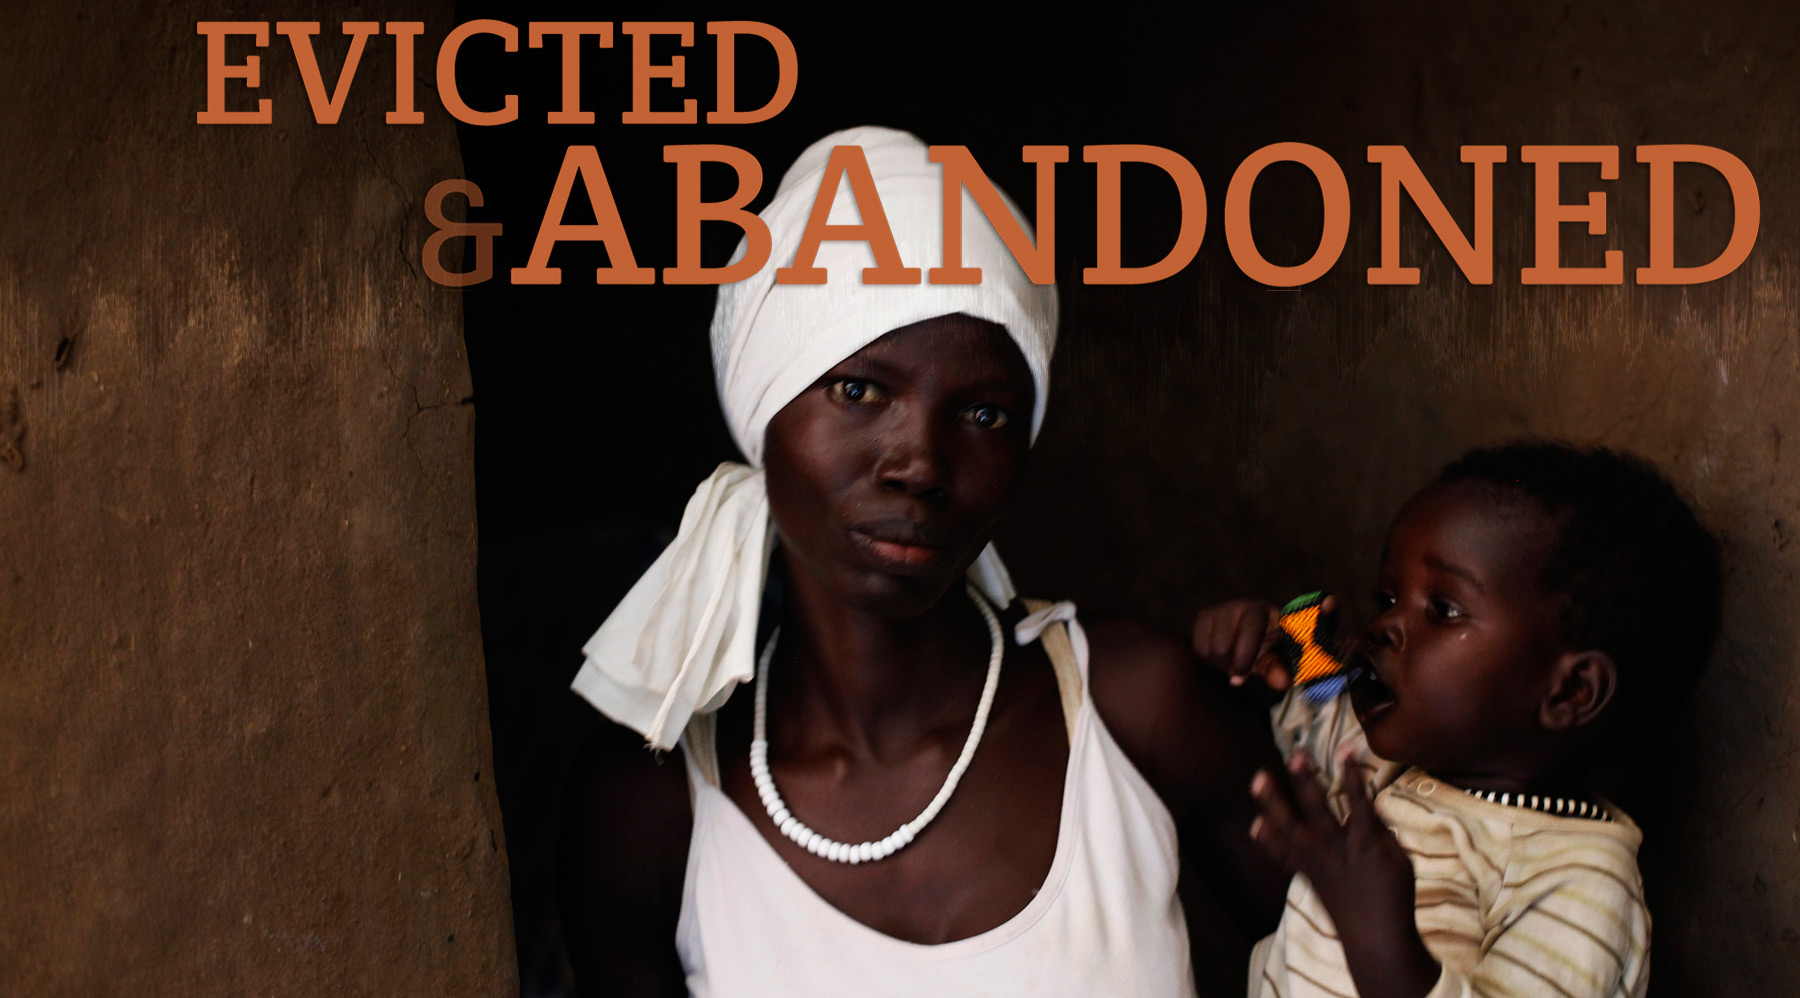 Evicted and Abandoned World Bank investigation